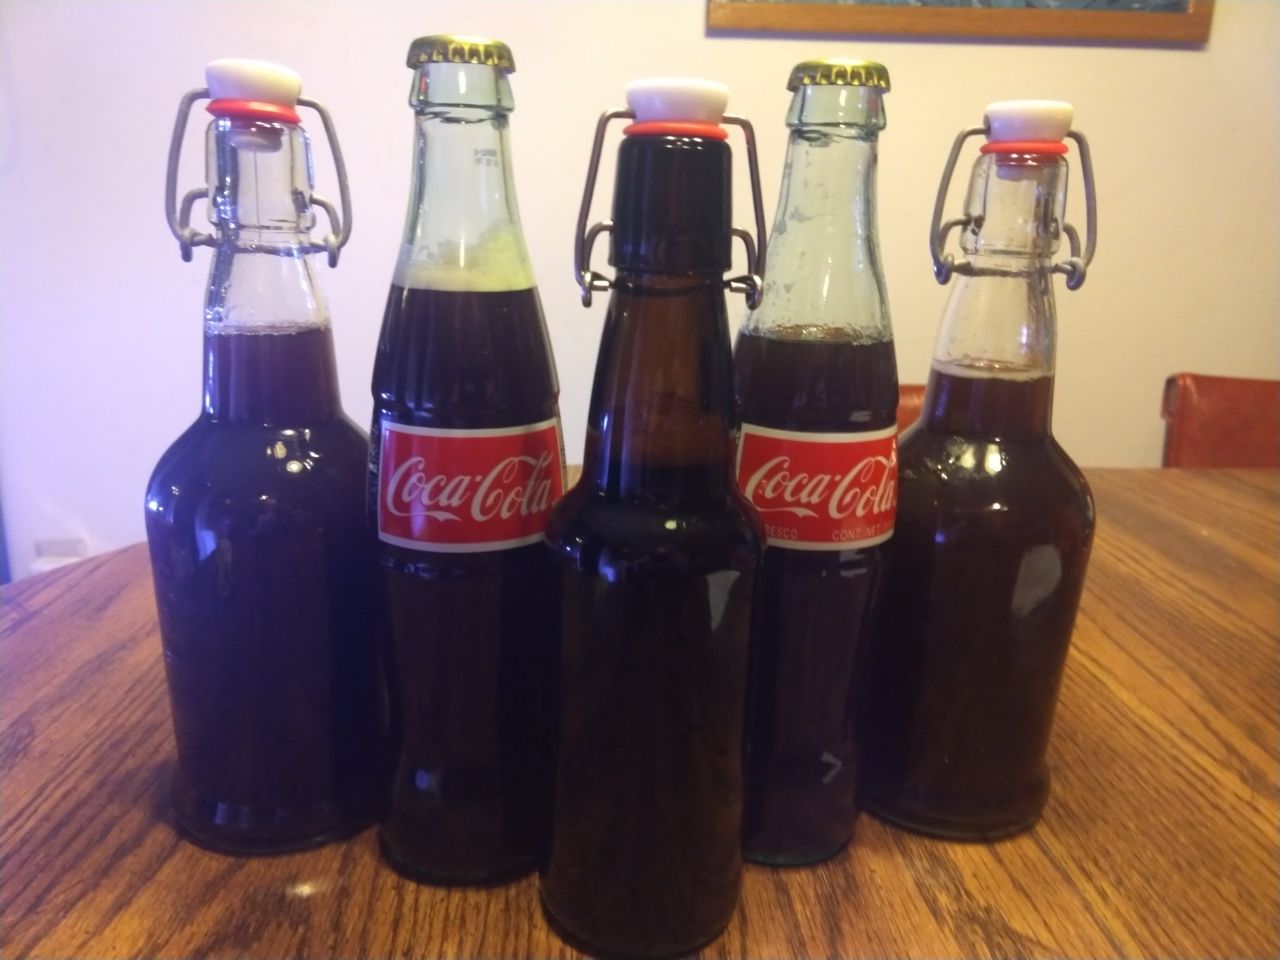 Root beer sealed into bottles to carbonate.